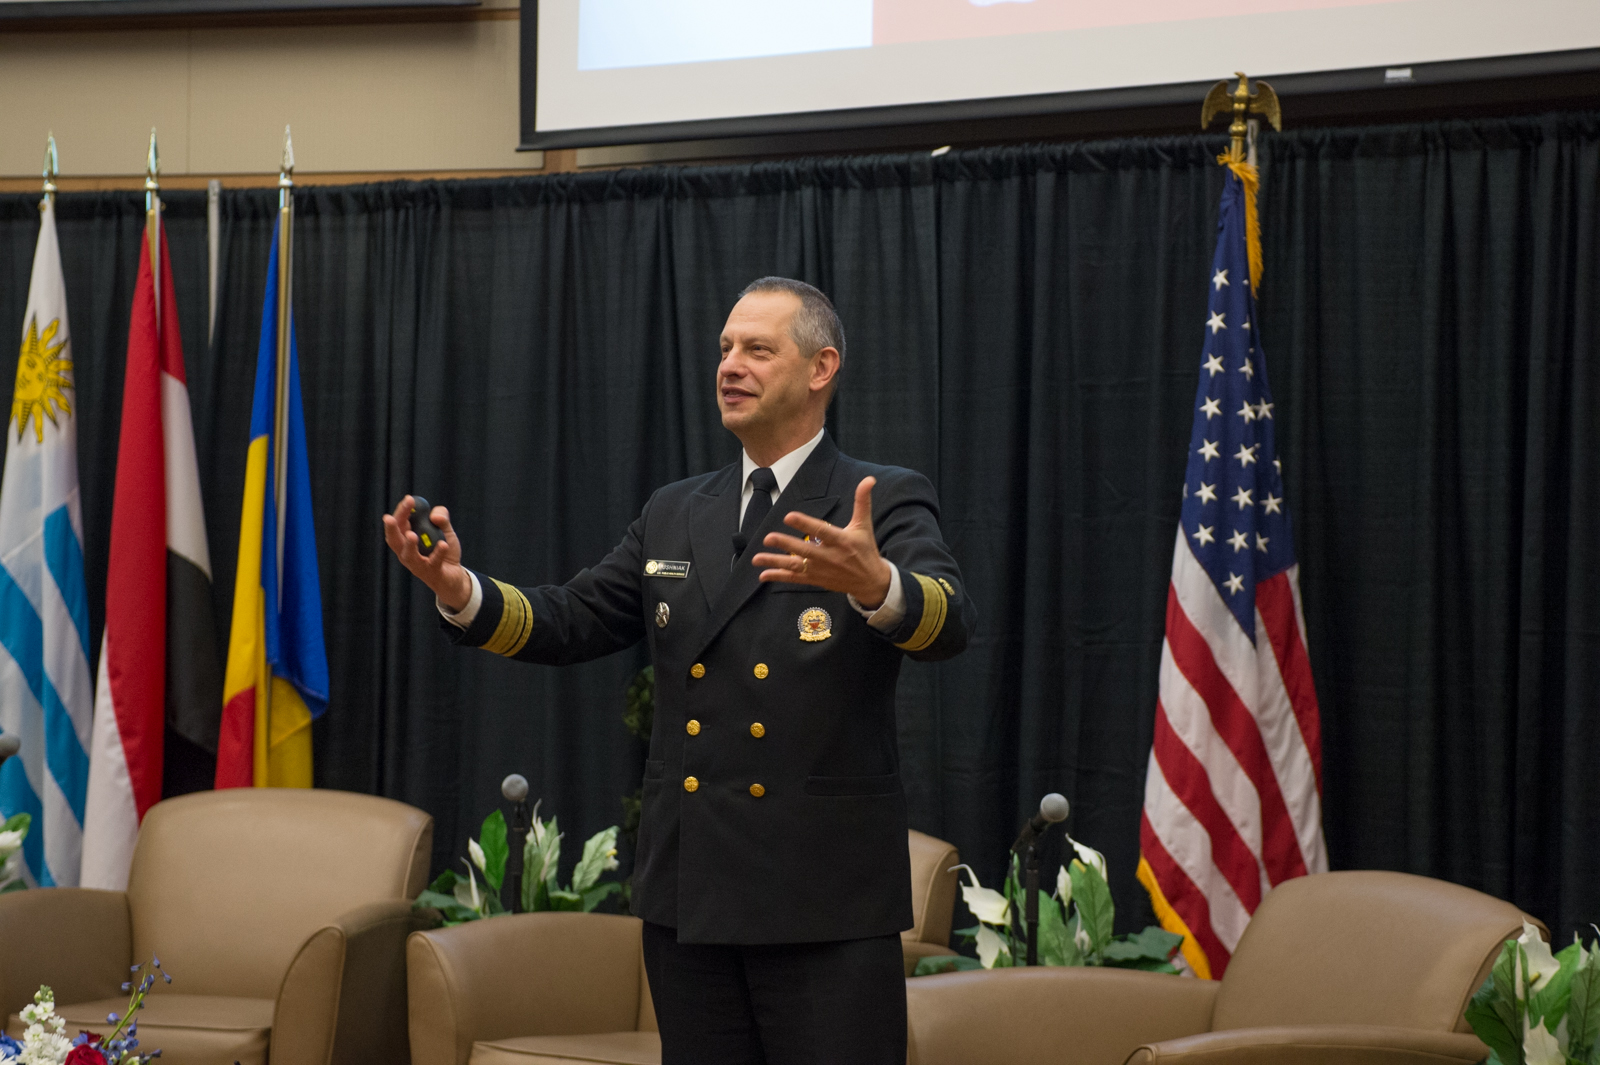 United States Deputy Surgeon General Rear Admiral (RADM) Boris D. Lushniak, MD, MPH, was the morning keynote speaker of the 3rd Annual Power of Inclusion conference on Tuesday, March 31